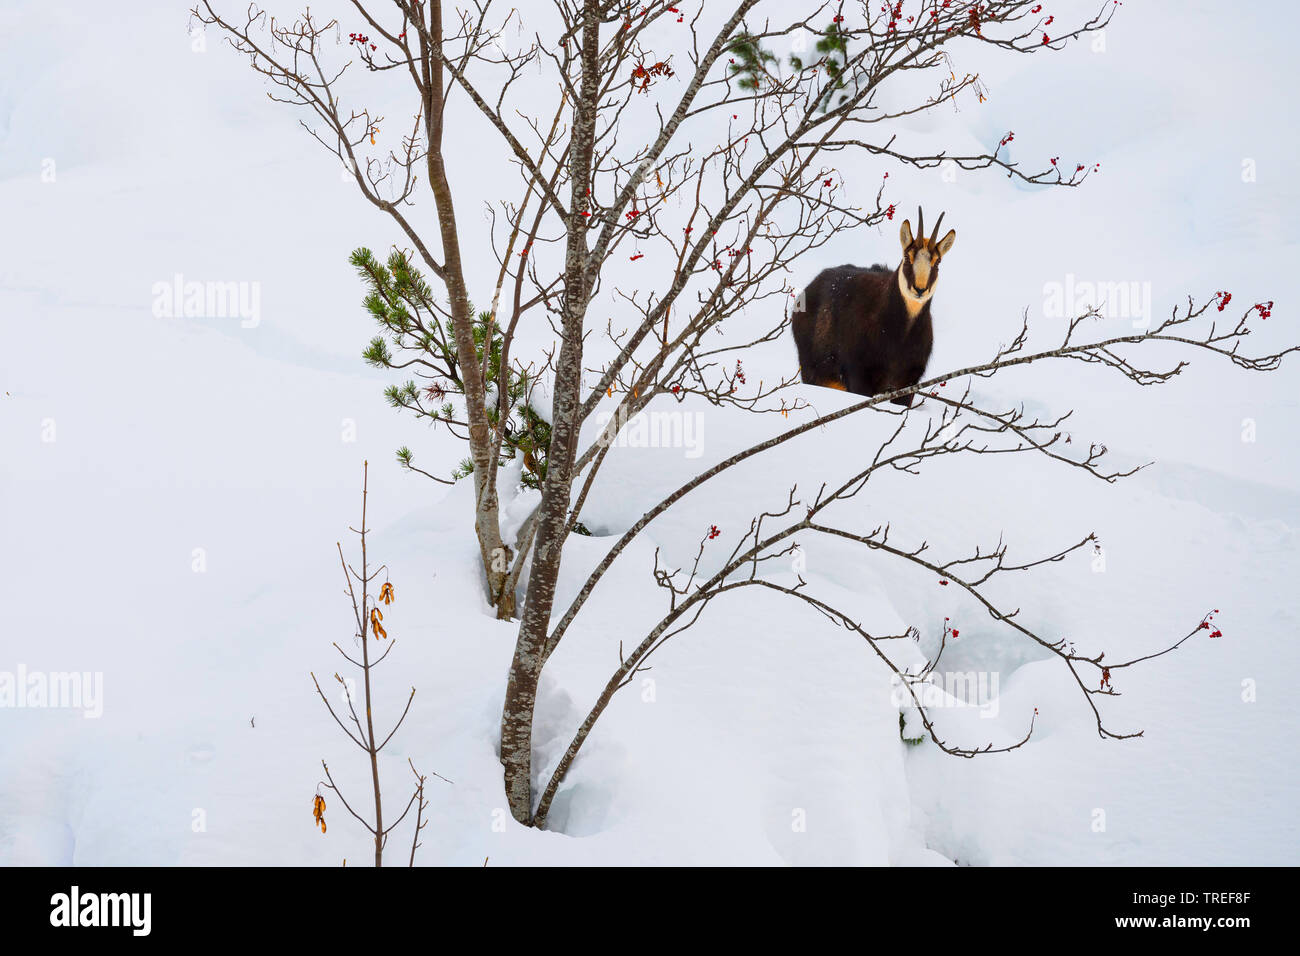 chamois (Rupicapra rupicapra), standing in snow behind a tree, Germany, Bavaria Stock Photo